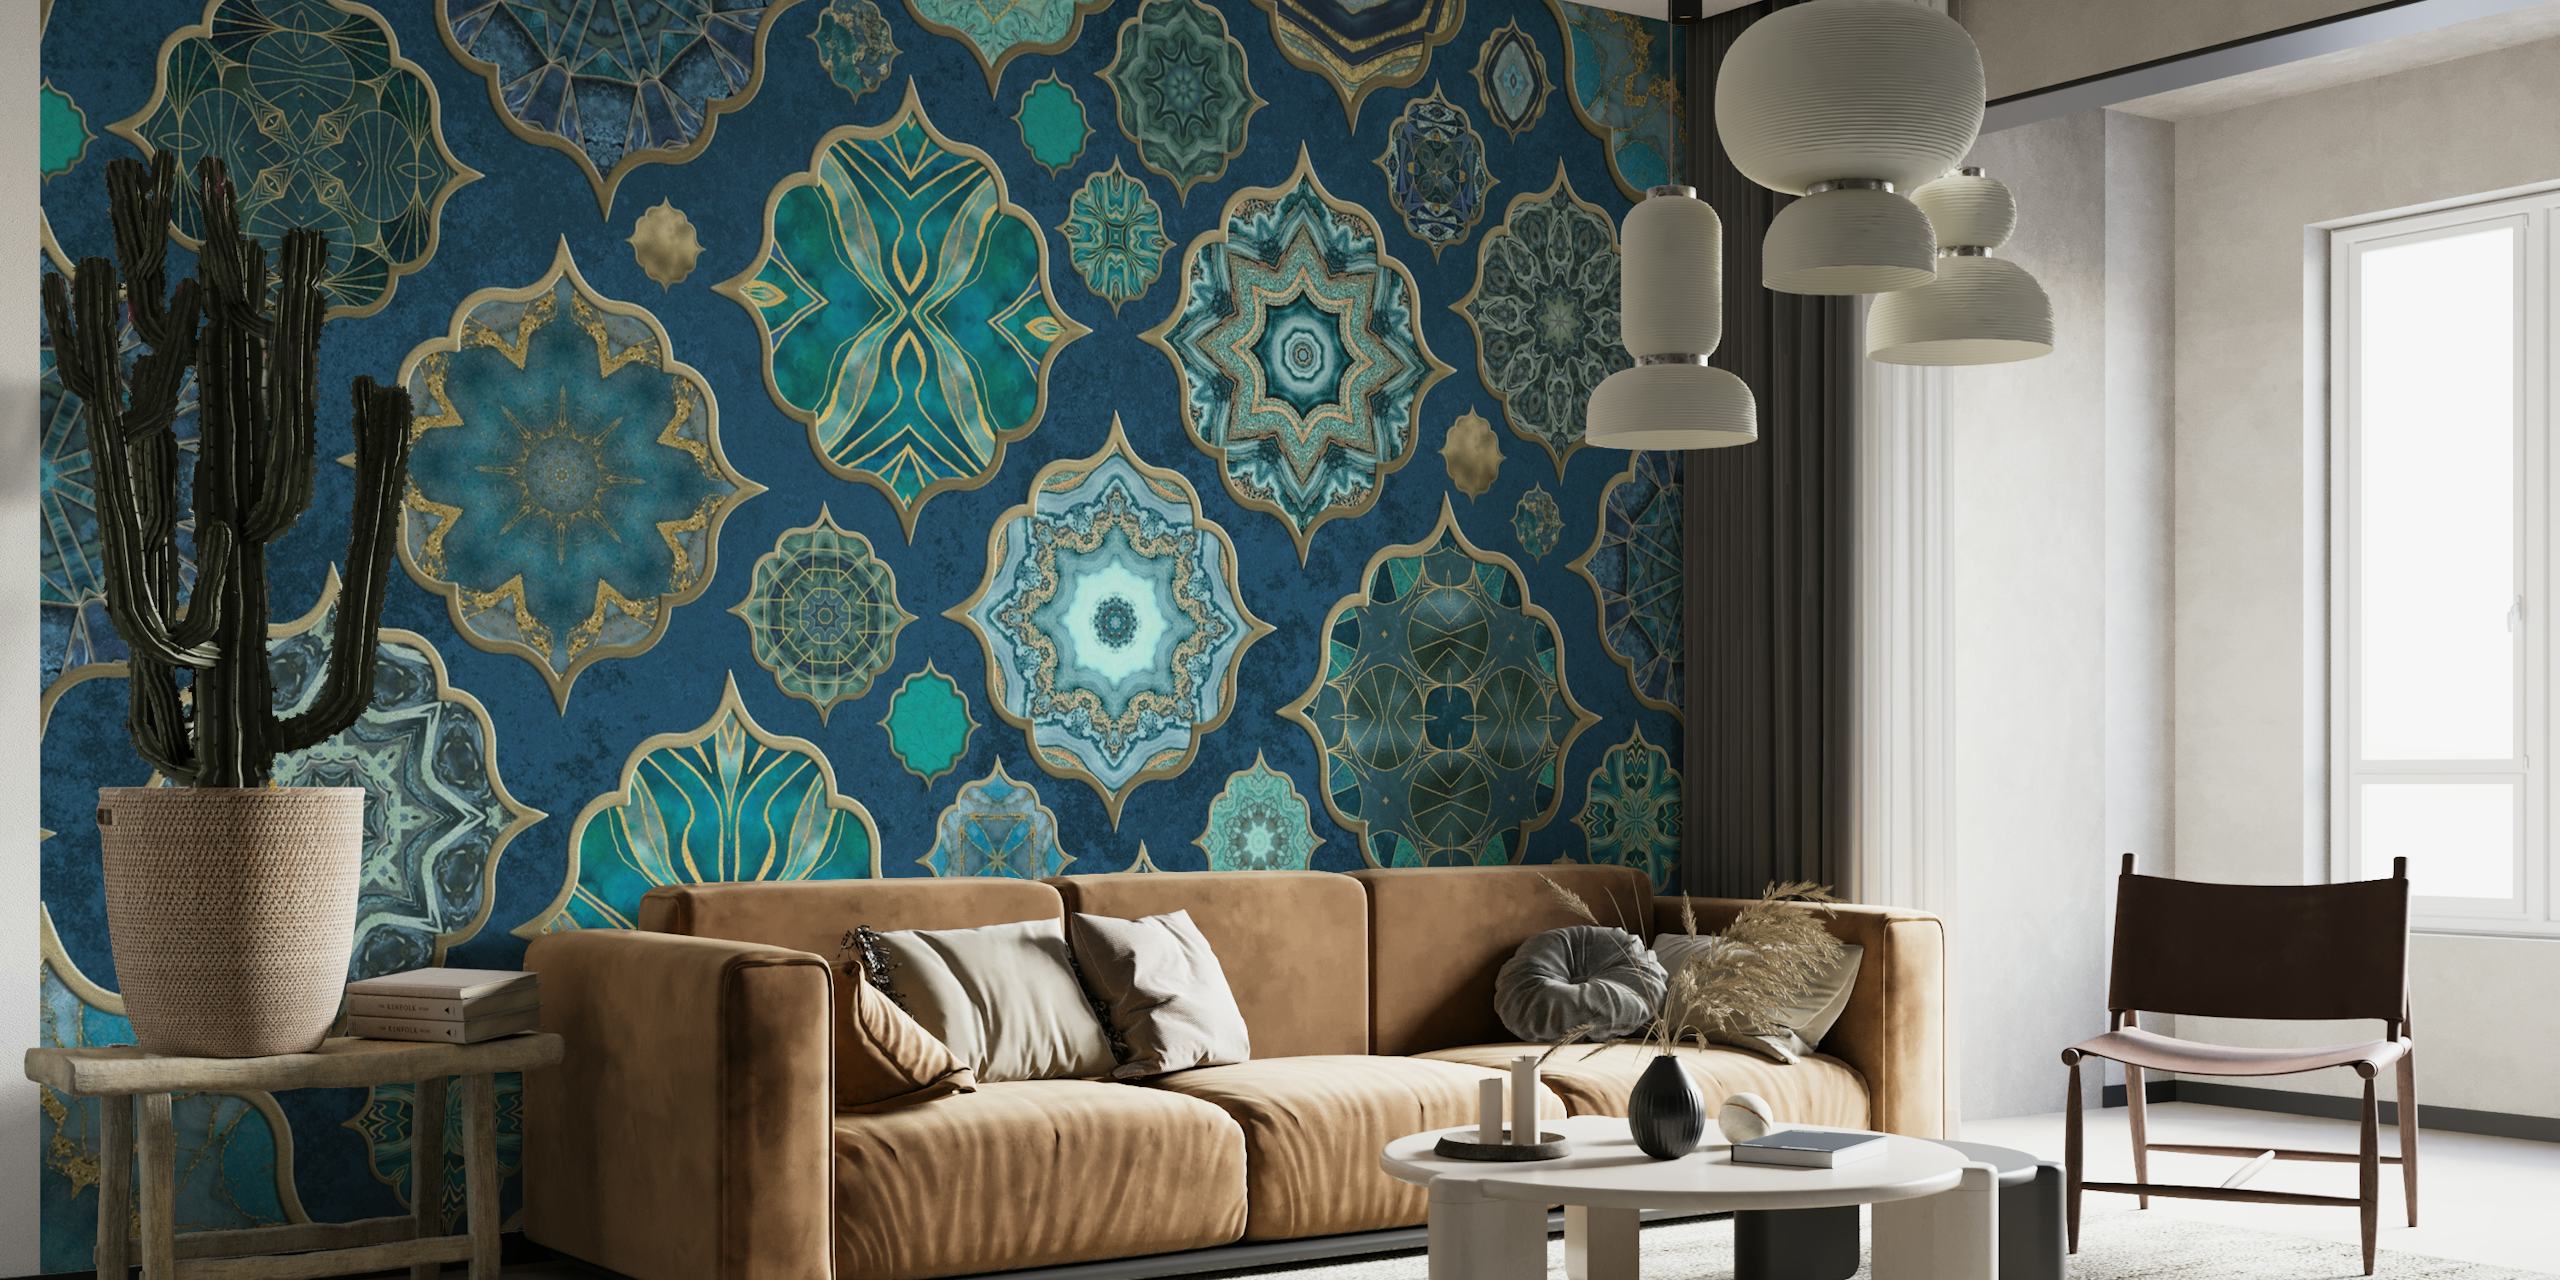 Moroccan-style tile pattern wall mural in shades of teal and navy with gold accents